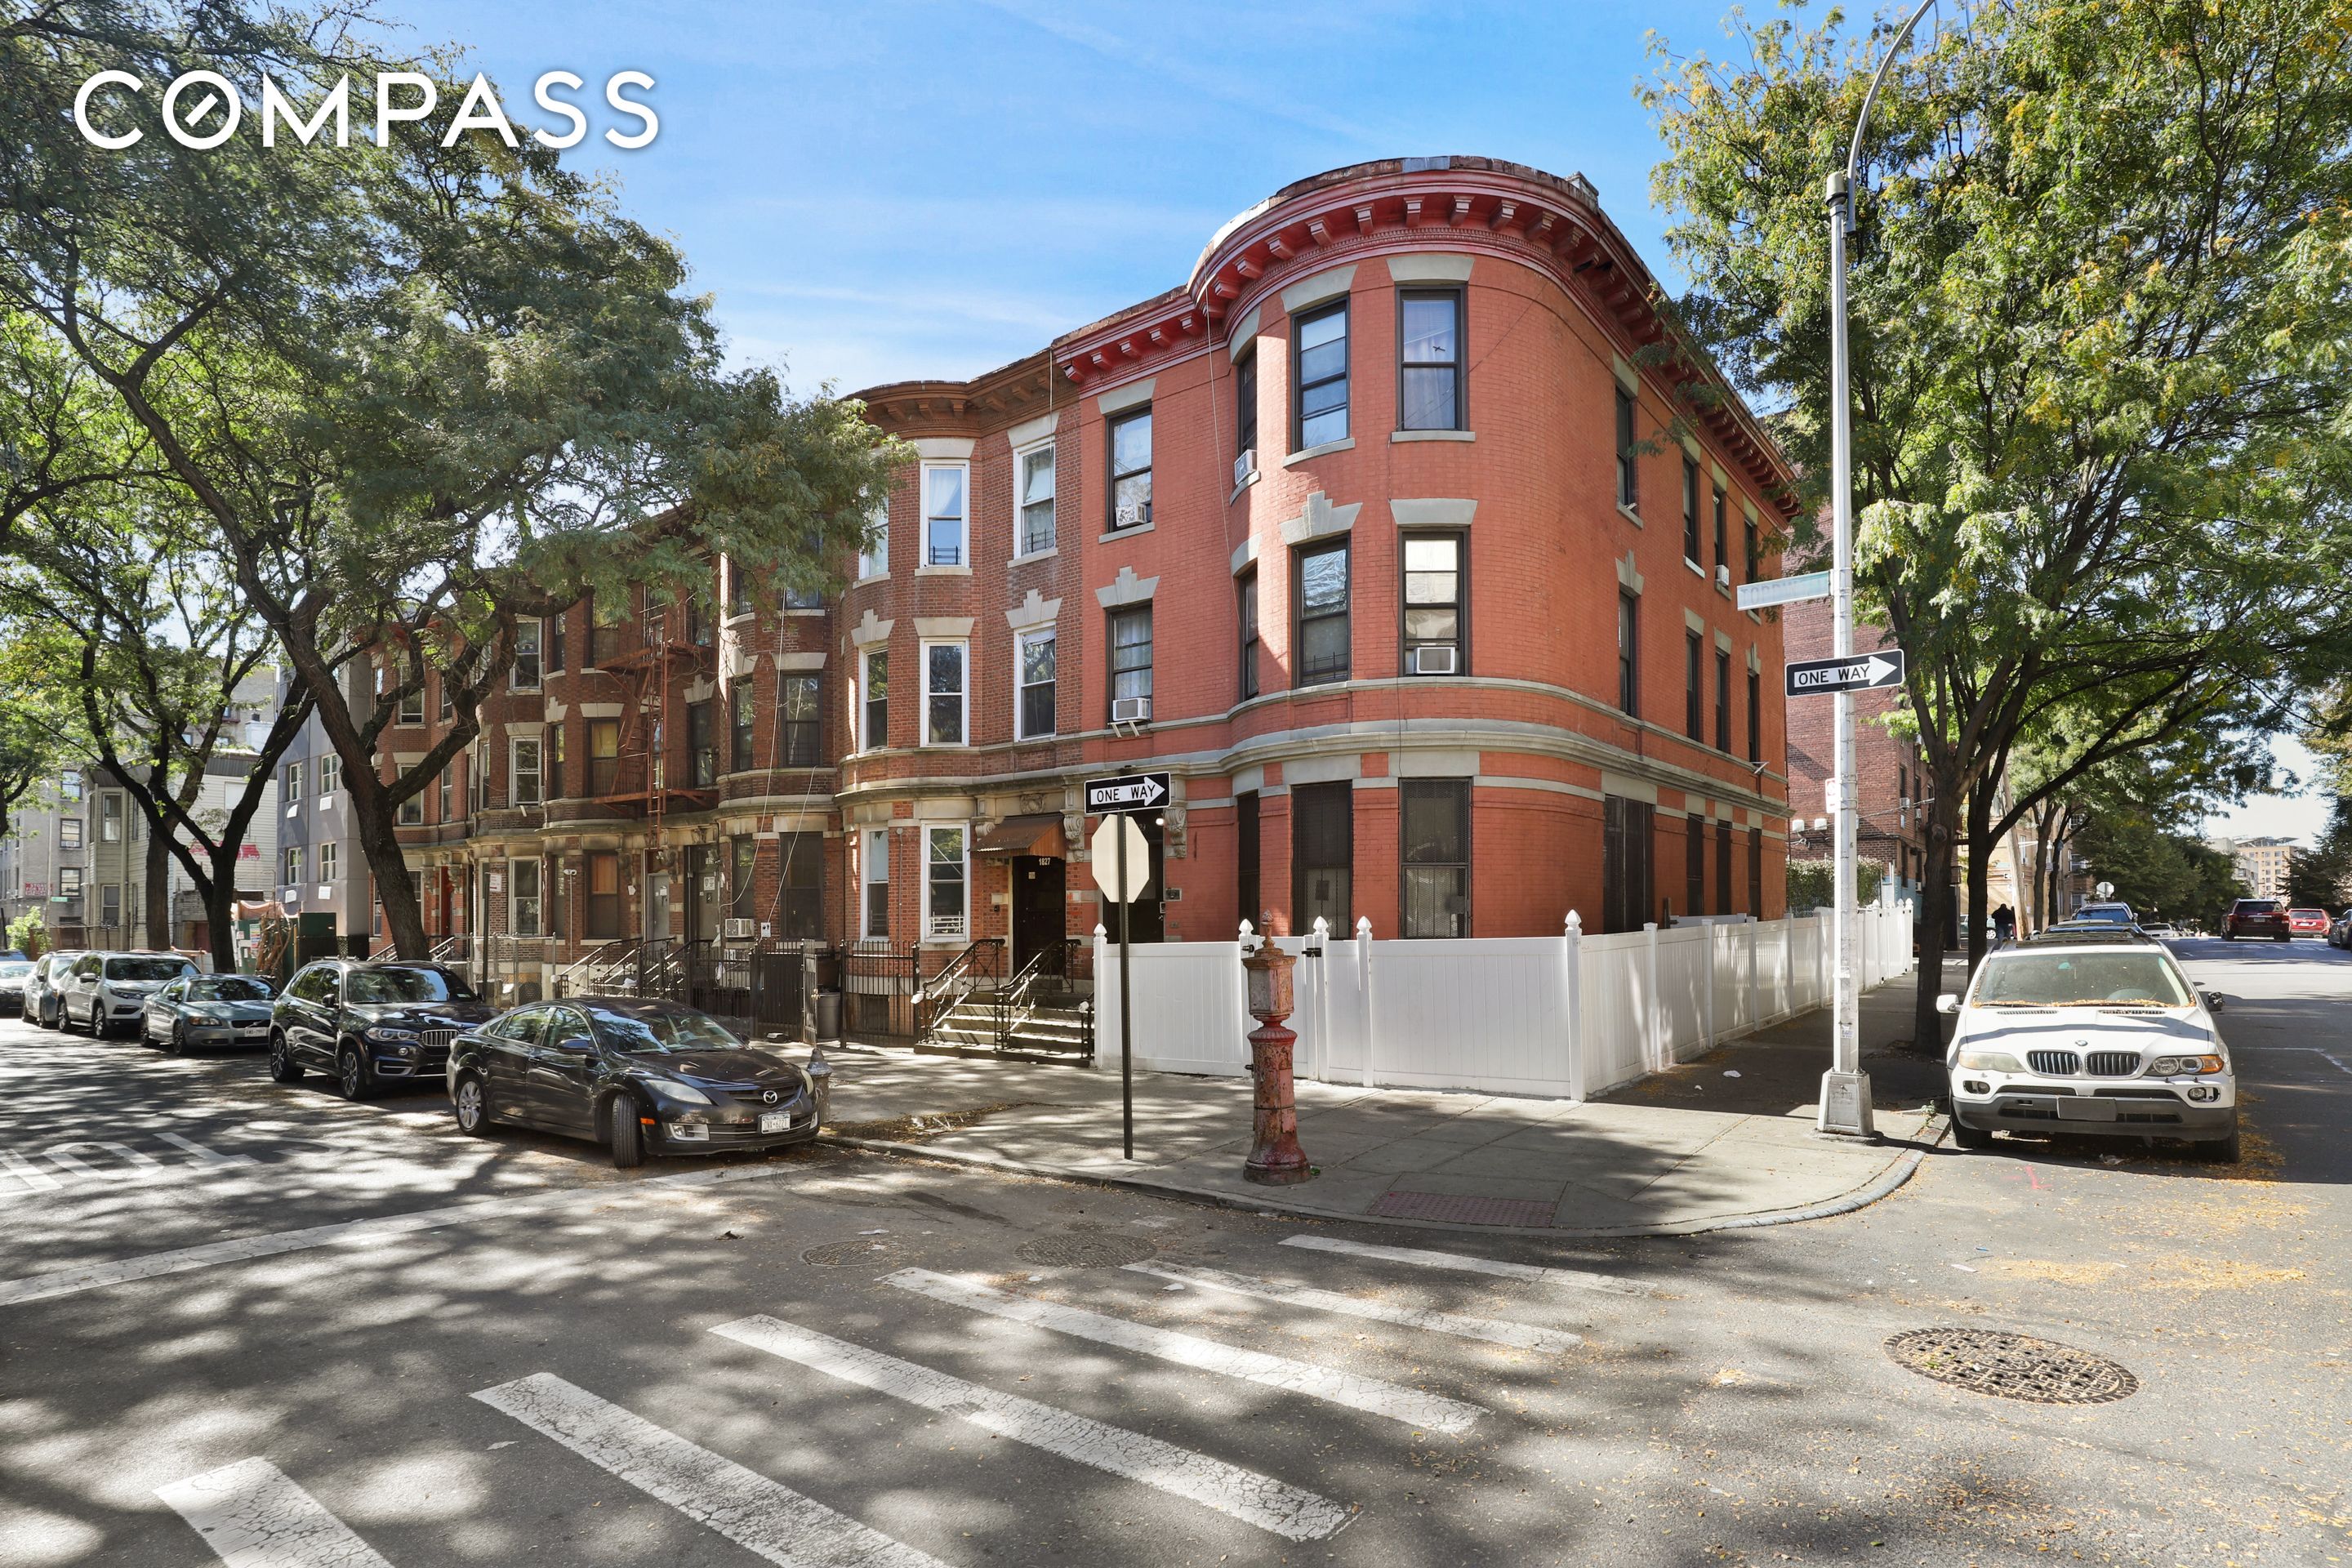 1827 Topping Avenue, Mount Hope, Bronx, New York - 9 Bedrooms  
3 Bathrooms  
18 Rooms - 